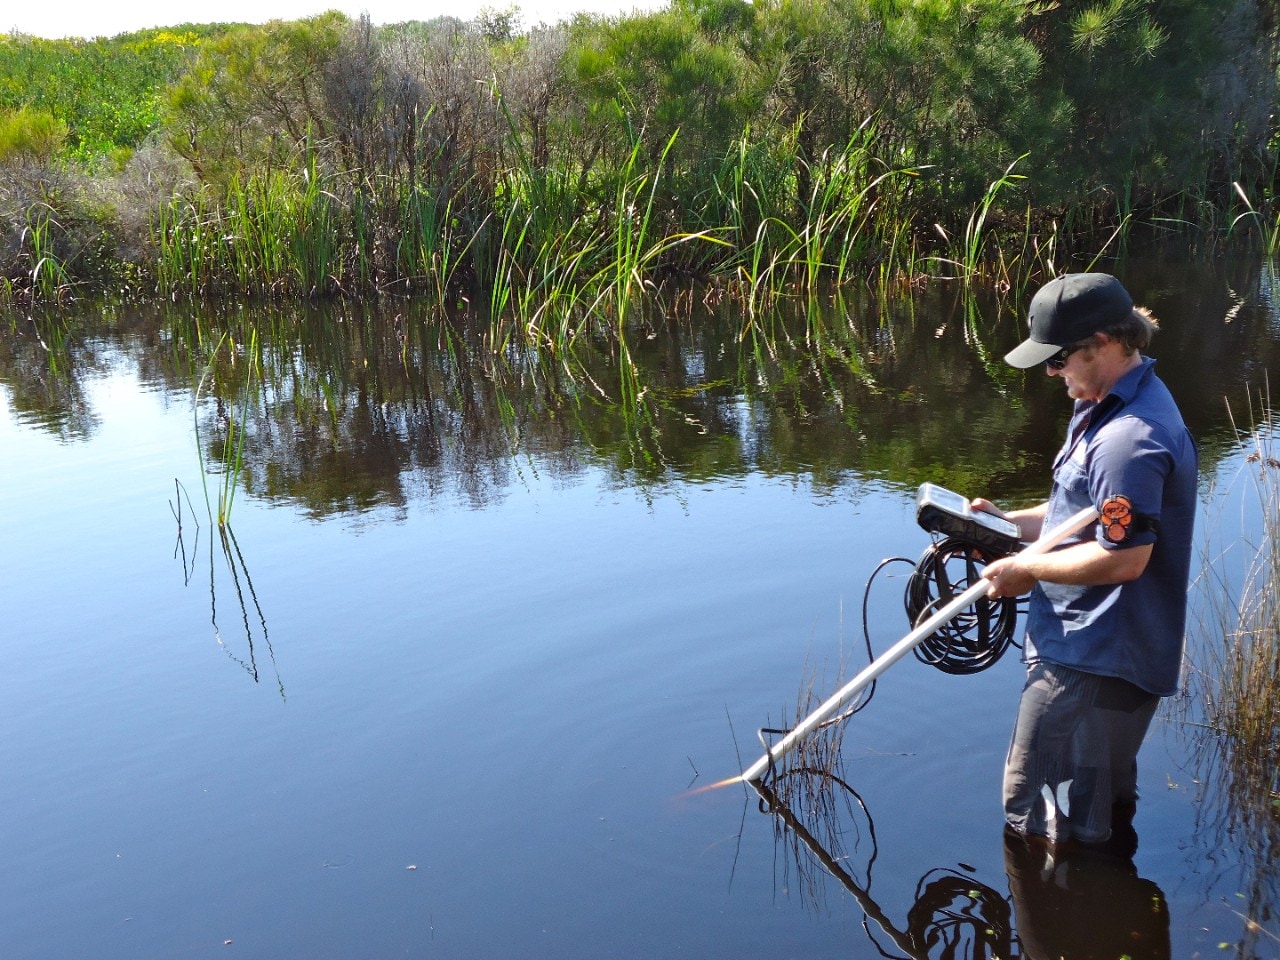 NSW Department of Planning, Industry and Environment officer collecting data at Bengello, near Batemans Bay. Photo courtesy NSW DPIE